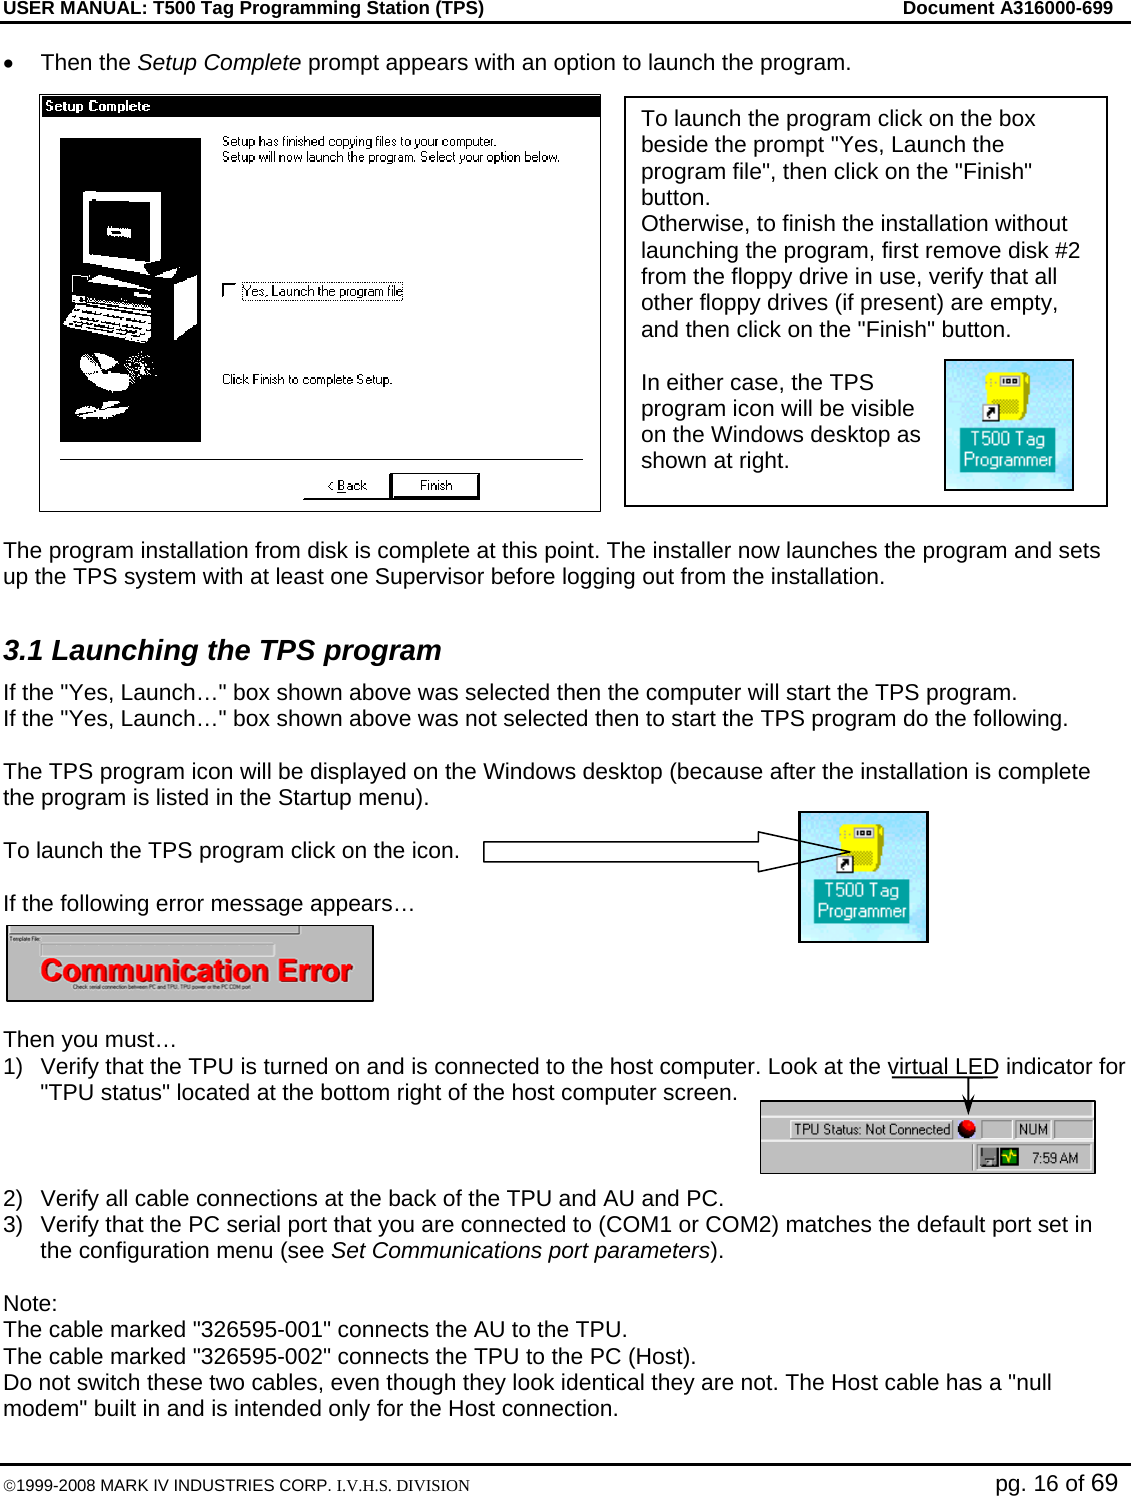 USER MANUAL: T500 Tag Programming Station (TPS)     Document A316000-699  ©1999-2008 MARK IV INDUSTRIES CORP. I.V.H.S. DIVISION   pg. 16 of 69 • Then the Setup Complete prompt appears with an option to launch the program.  The program installation from disk is complete at this point. The installer now launches the program and sets up the TPS system with at least one Supervisor before logging out from the installation.  3.1 Launching the TPS program If the &quot;Yes, Launch…&quot; box shown above was selected then the computer will start the TPS program. If the &quot;Yes, Launch…&quot; box shown above was not selected then to start the TPS program do the following.  The TPS program icon will be displayed on the Windows desktop (because after the installation is complete the program is listed in the Startup menu).   To launch the TPS program click on the icon.  If the following error message appears…  Then you must… 1)  Verify that the TPU is turned on and is connected to the host computer. Look at the virtual LED indicator for &quot;TPU status&quot; located at the bottom right of the host computer screen.    2)  Verify all cable connections at the back of the TPU and AU and PC.  3)  Verify that the PC serial port that you are connected to (COM1 or COM2) matches the default port set in the configuration menu (see Set Communications port parameters).  Note: The cable marked &quot;326595-001&quot; connects the AU to the TPU.  The cable marked &quot;326595-002&quot; connects the TPU to the PC (Host).  Do not switch these two cables, even though they look identical they are not. The Host cable has a &quot;null modem&quot; built in and is intended only for the Host connection.  To launch the program click on the box beside the prompt &quot;Yes, Launch the program file&quot;, then click on the &quot;Finish&quot; button.  Otherwise, to finish the installation without launching the program, first remove disk #2 from the floppy drive in use, verify that all other floppy drives (if present) are empty, and then click on the &quot;Finish&quot; button.  In either case, the TPS program icon will be visible on the Windows desktop as shown at right. 